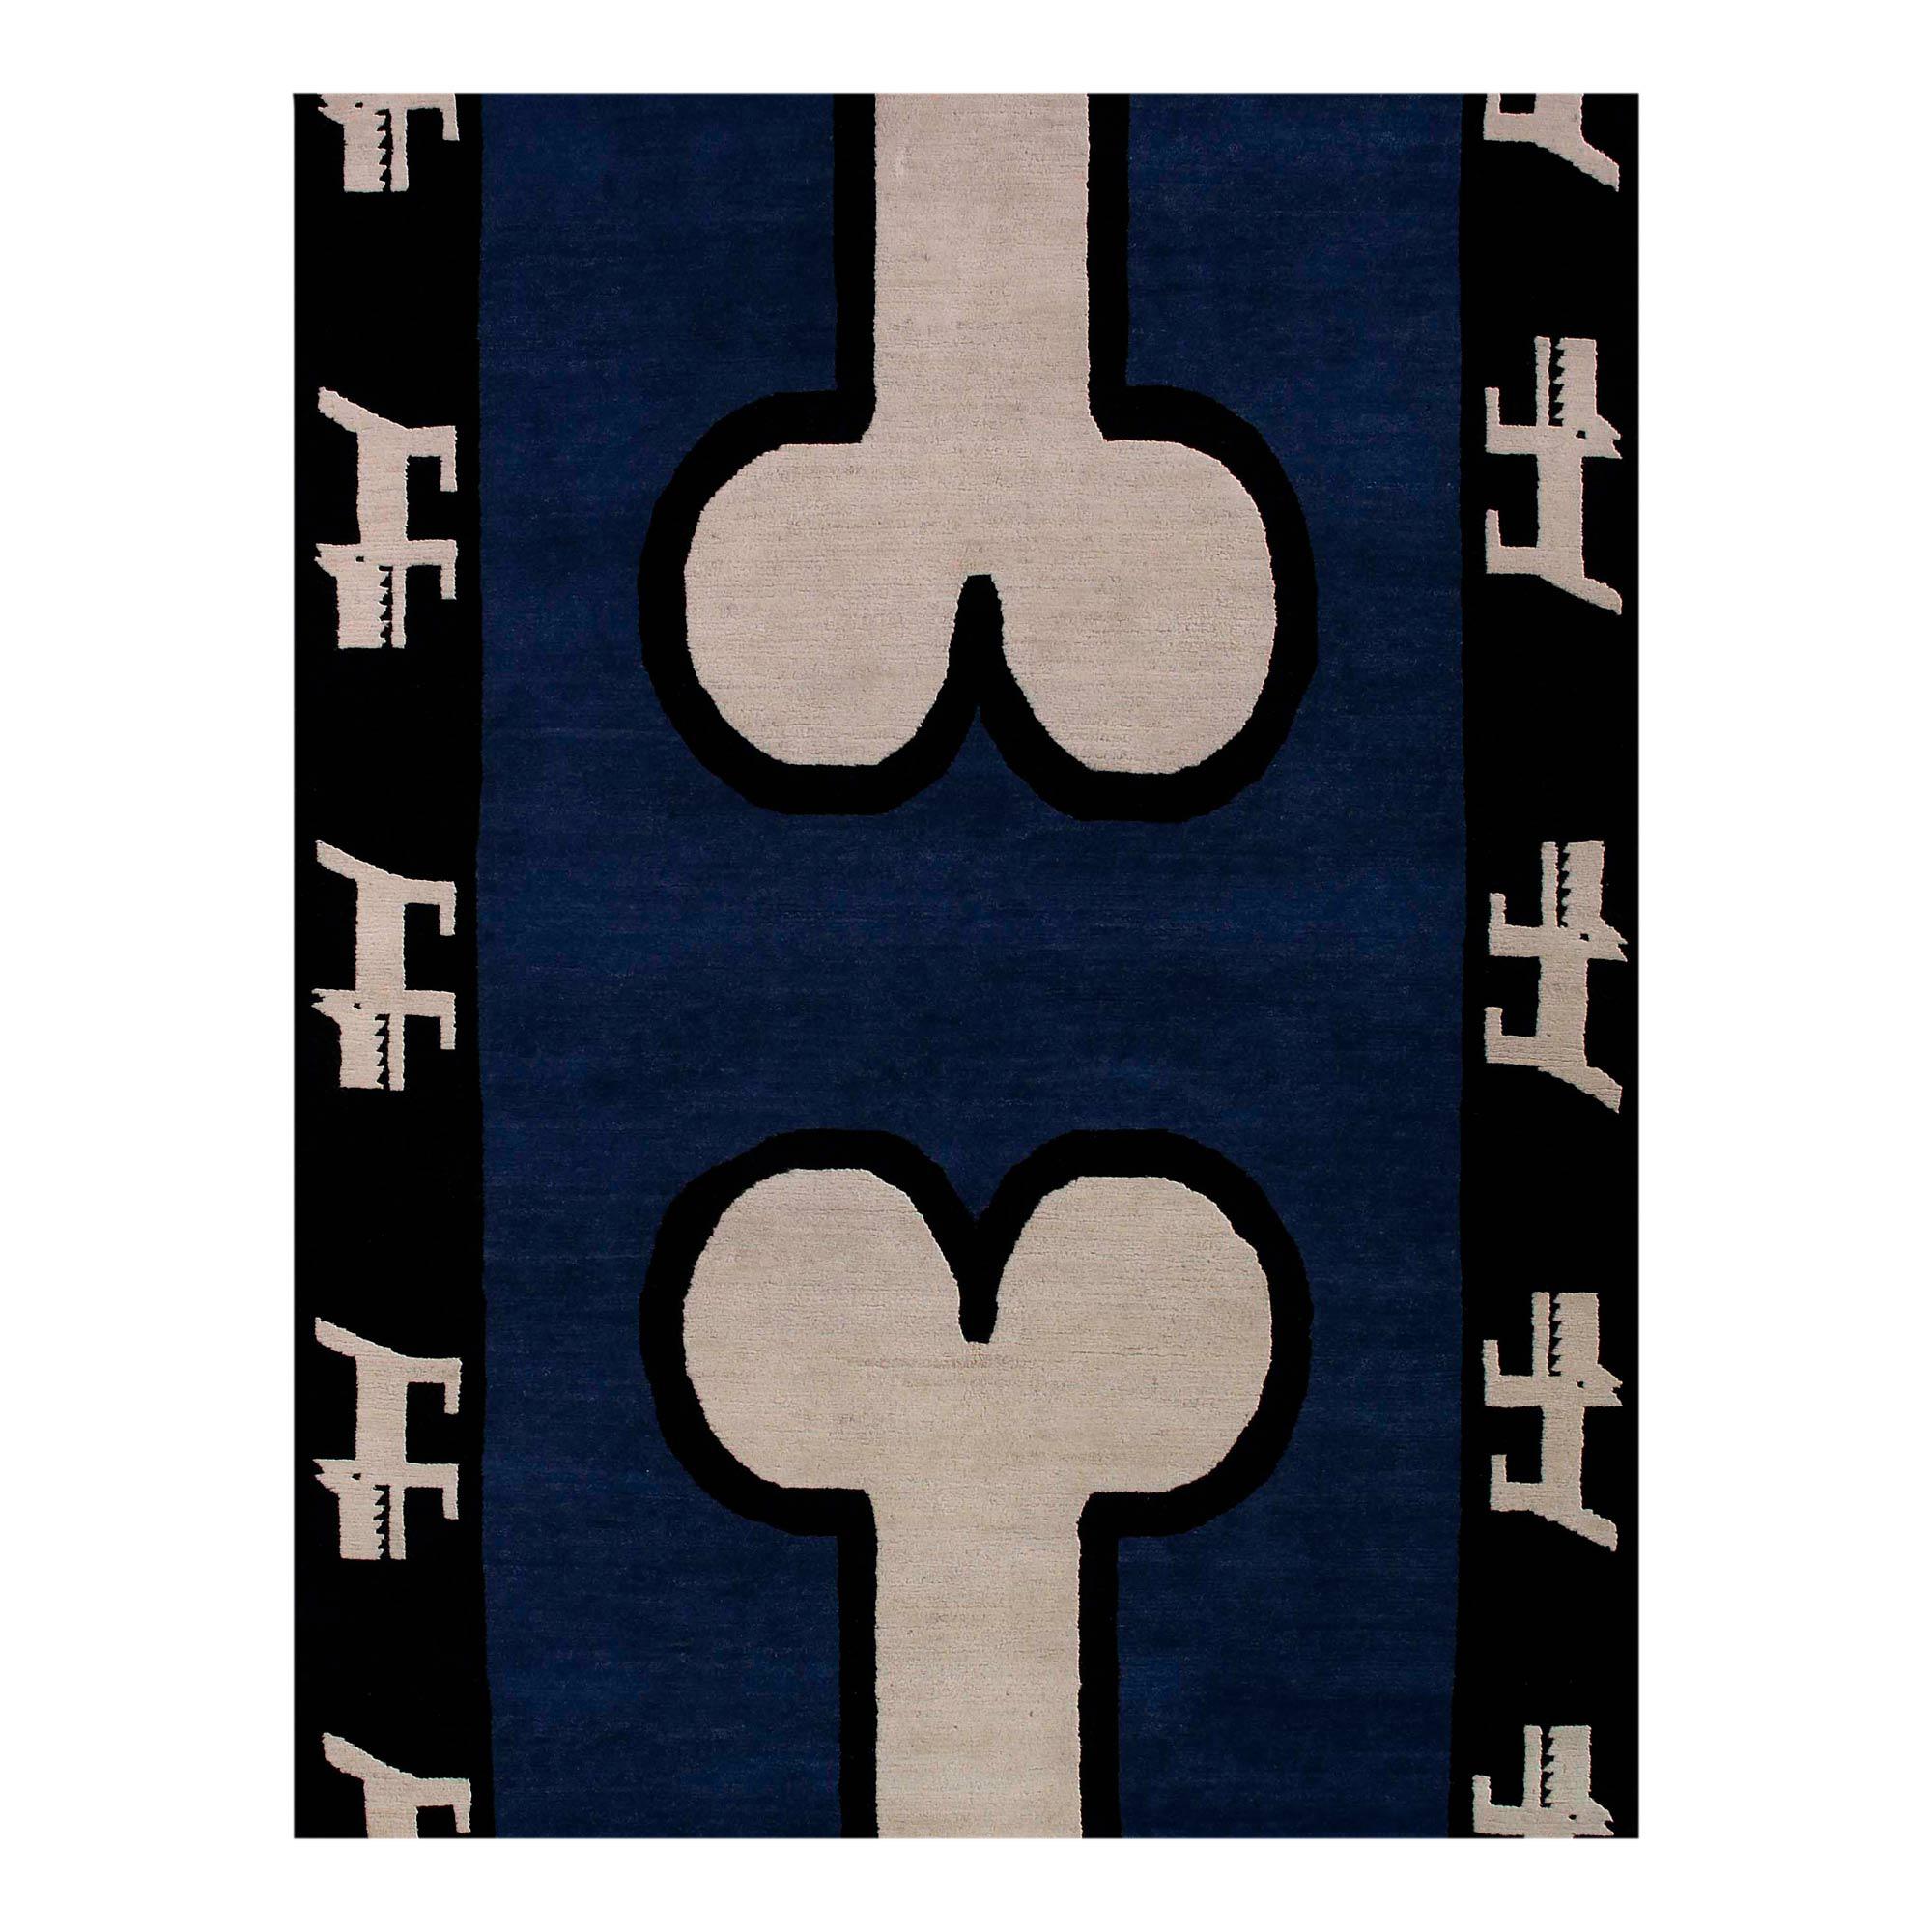 SG3 Woollen Carpet by Stefano Giovannoni for Post Design Collection/Memphis For Sale